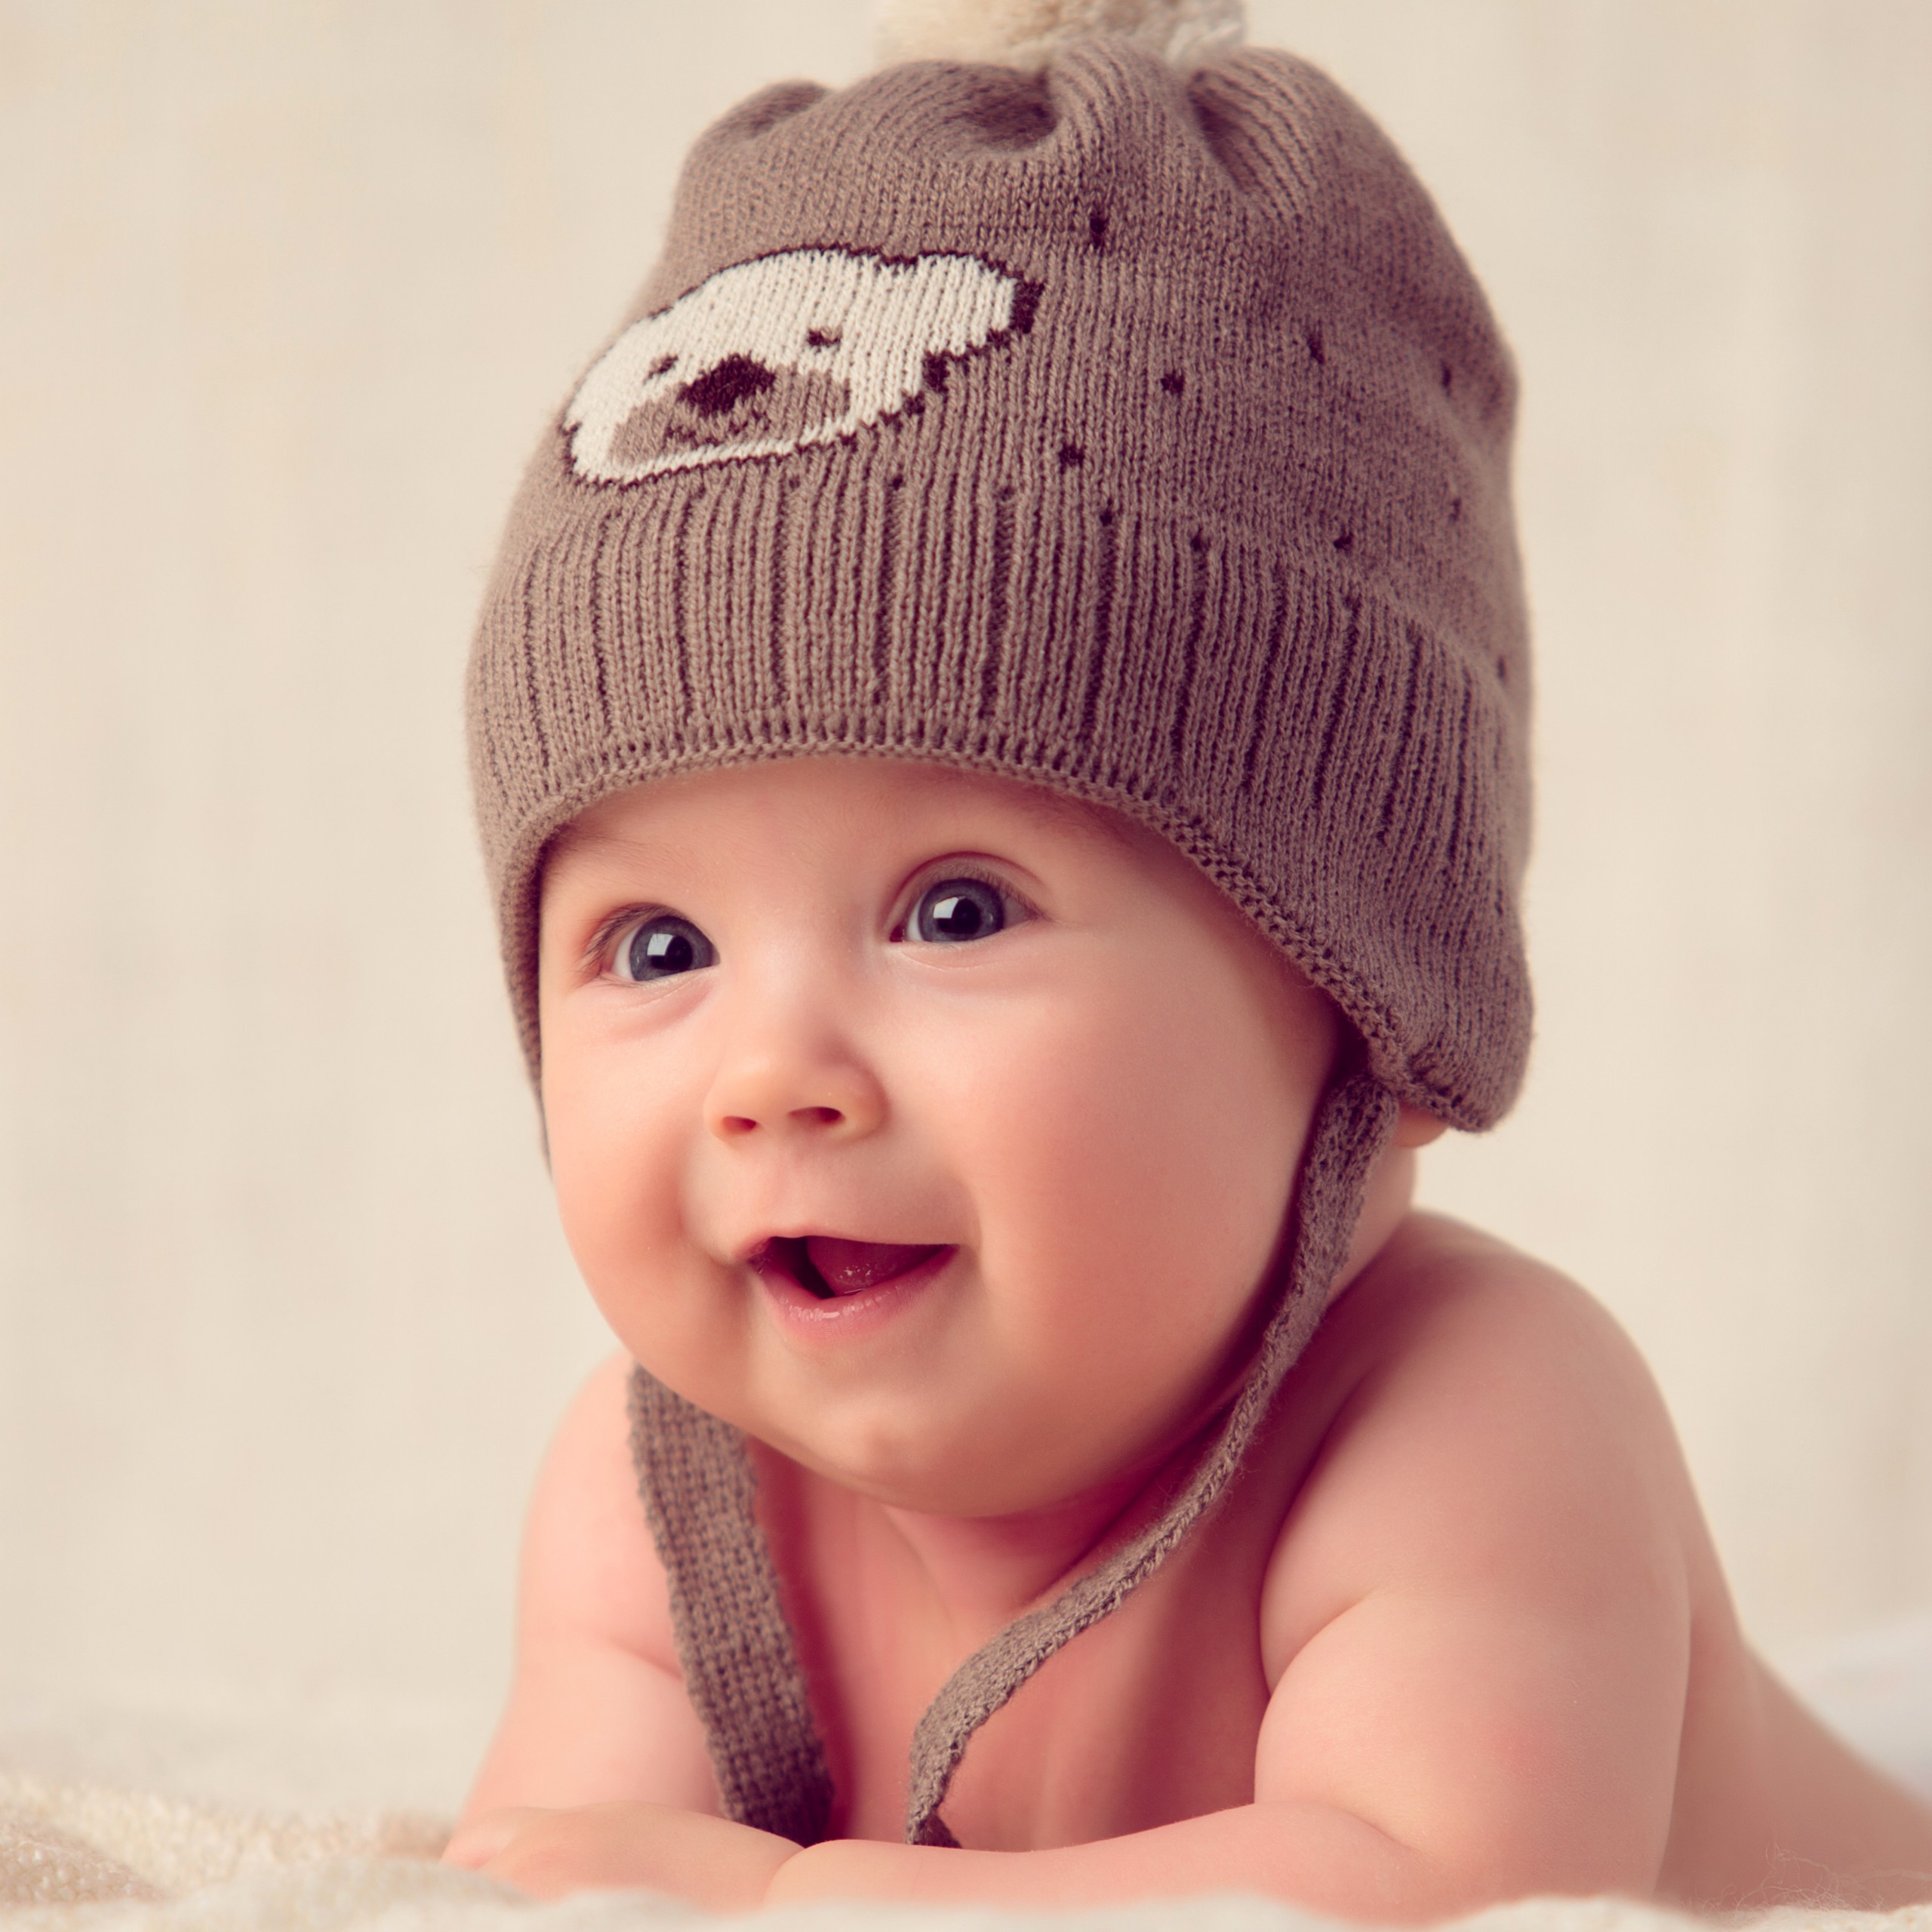 Cute Baby Wallpapers 71 pictures